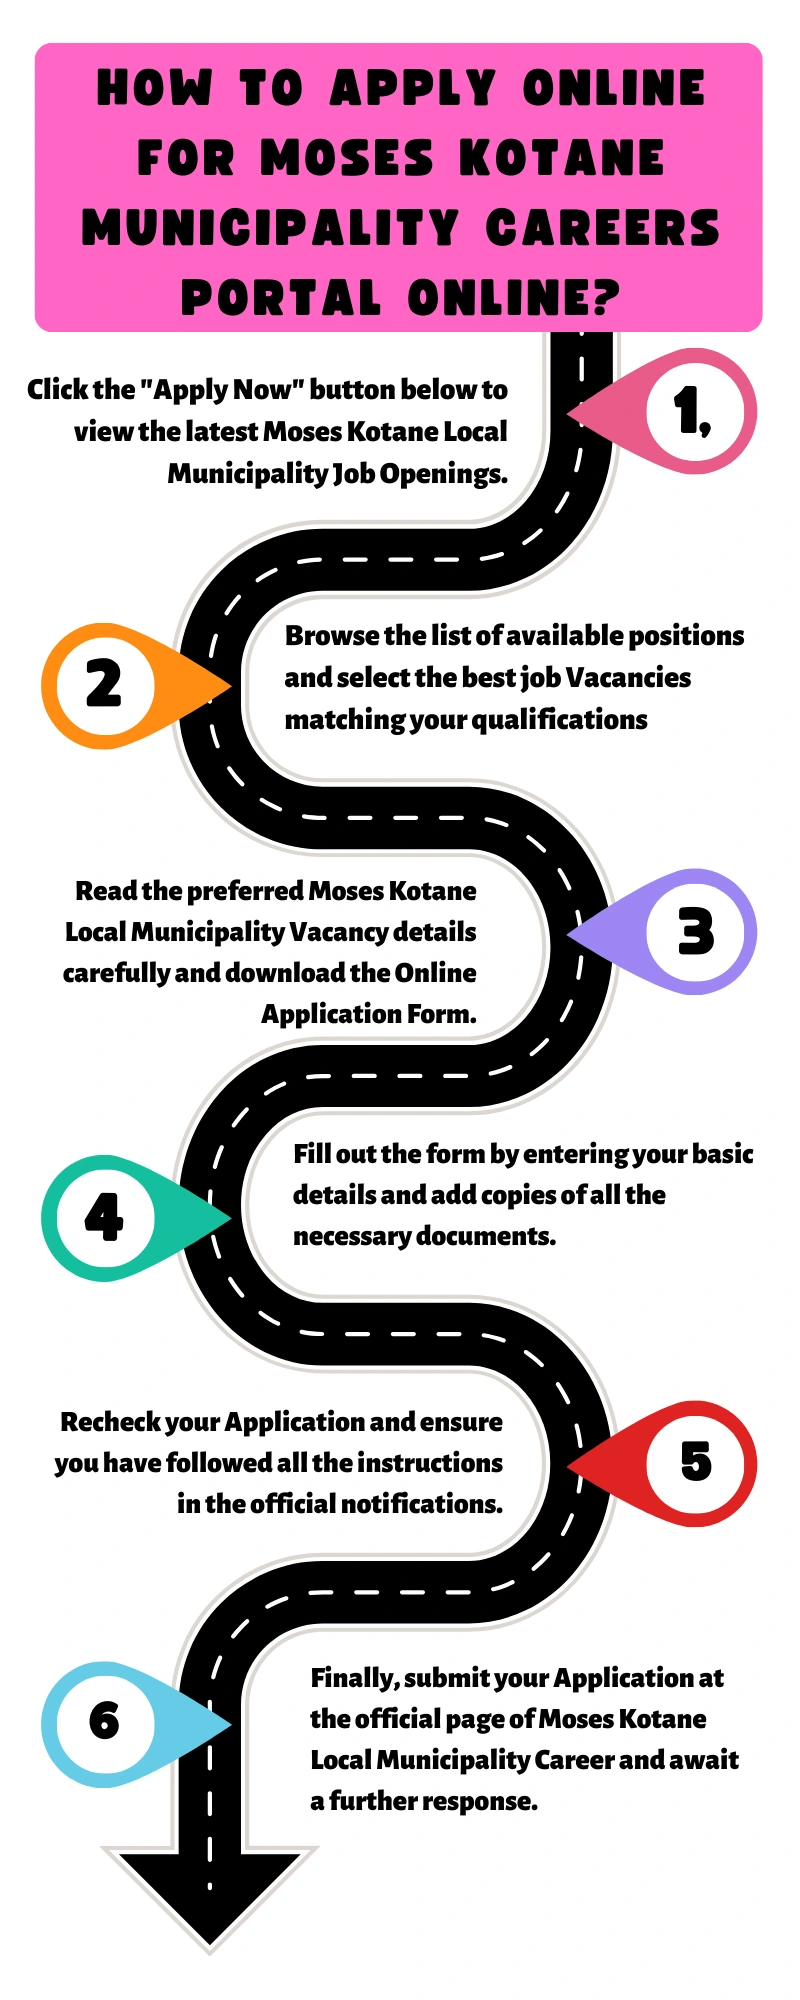 How to Apply online for Moses Kotane Municipality Careers Portal Online?